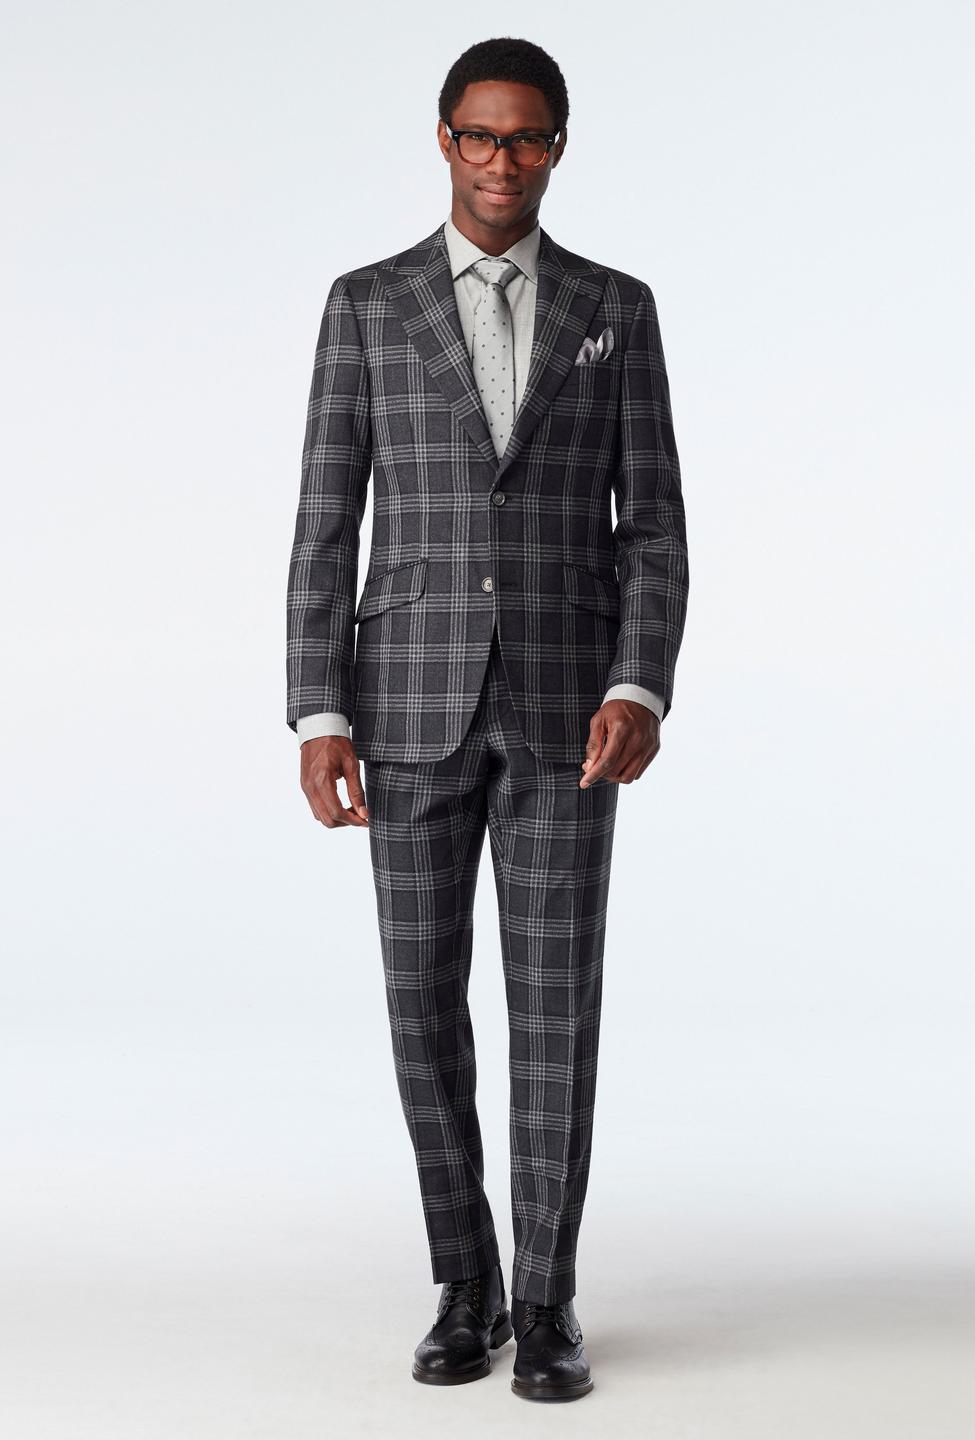 Gray suit - Deerhurst Checked Design from Seasonal Indochino Collection